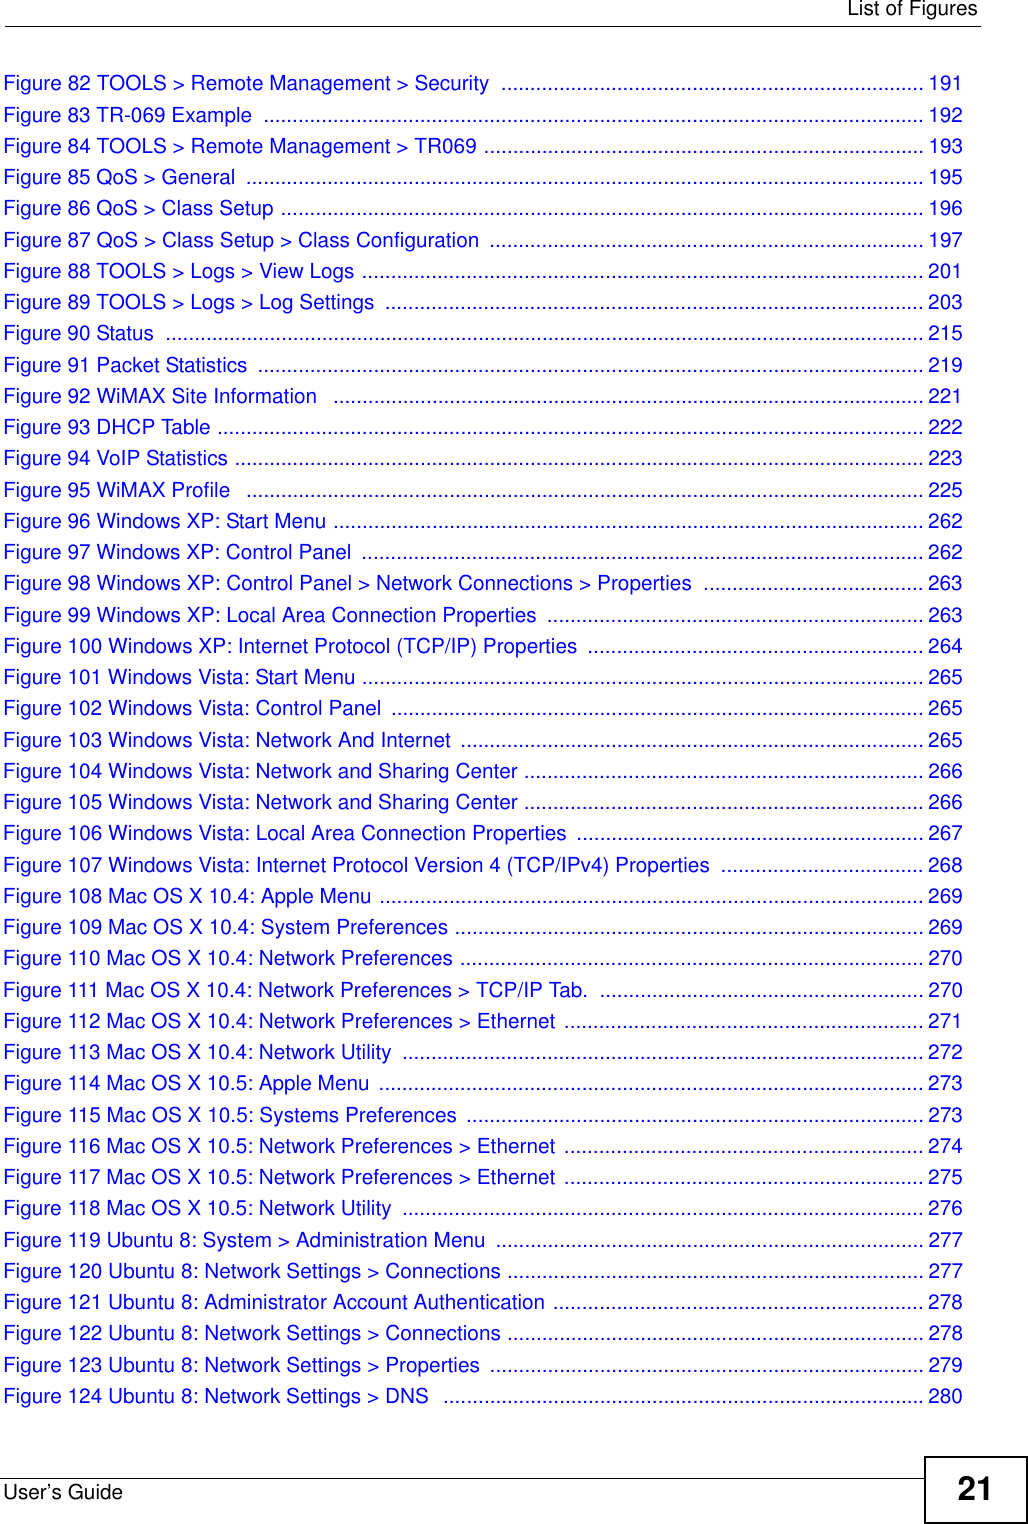  List of FiguresUser’s Guide 21Figure 82 TOOLS &gt; Remote Management &gt; Security  ......................................................................... 191Figure 83 TR-069 Example  .................................................................................................................. 192Figure 84 TOOLS &gt; Remote Management &gt; TR069 ............................................................................ 193Figure 85 QoS &gt; General  ..................................................................................................................... 195Figure 86 QoS &gt; Class Setup ............................................................................................................... 196Figure 87 QoS &gt; Class Setup &gt; Class Configuration ........................................................................... 197Figure 88 TOOLS &gt; Logs &gt; View Logs ................................................................................................. 201Figure 89 TOOLS &gt; Logs &gt; Log Settings  ............................................................................................. 203Figure 90 Status  ................................................................................................................................... 215Figure 91 Packet Statistics  ................................................................................................................... 219Figure 92 WiMAX Site Information   ...................................................................................................... 221Figure 93 DHCP Table .......................................................................................................................... 222Figure 94 VoIP Statistics ....................................................................................................................... 223Figure 95 WiMAX Profile   ..................................................................................................................... 225Figure 96 Windows XP: Start Menu ...................................................................................................... 262Figure 97 Windows XP: Control Panel  ................................................................................................. 262Figure 98 Windows XP: Control Panel &gt; Network Connections &gt; Properties  ...................................... 263Figure 99 Windows XP: Local Area Connection Properties  ................................................................. 263Figure 100 Windows XP: Internet Protocol (TCP/IP) Properties  .......................................................... 264Figure 101 Windows Vista: Start Menu ................................................................................................. 265Figure 102 Windows Vista: Control Panel  ............................................................................................ 265Figure 103 Windows Vista: Network And Internet  ................................................................................ 265Figure 104 Windows Vista: Network and Sharing Center ..................................................................... 266Figure 105 Windows Vista: Network and Sharing Center ..................................................................... 266Figure 106 Windows Vista: Local Area Connection Properties ............................................................ 267Figure 107 Windows Vista: Internet Protocol Version 4 (TCP/IPv4) Properties  ................................... 268Figure 108 Mac OS X 10.4: Apple Menu .............................................................................................. 269Figure 109 Mac OS X 10.4: System Preferences ................................................................................. 269Figure 110 Mac OS X 10.4: Network Preferences ................................................................................ 270Figure 111 Mac OS X 10.4: Network Preferences &gt; TCP/IP Tab.  ........................................................ 270Figure 112 Mac OS X 10.4: Network Preferences &gt; Ethernet  .............................................................. 271Figure 113 Mac OS X 10.4: Network Utility  .......................................................................................... 272Figure 114 Mac OS X 10.5: Apple Menu  .............................................................................................. 273Figure 115 Mac OS X 10.5: Systems Preferences  ............................................................................... 273Figure 116 Mac OS X 10.5: Network Preferences &gt; Ethernet  .............................................................. 274Figure 117 Mac OS X 10.5: Network Preferences &gt; Ethernet  .............................................................. 275Figure 118 Mac OS X 10.5: Network Utility  .......................................................................................... 276Figure 119 Ubuntu 8: System &gt; Administration Menu .......................................................................... 277Figure 120 Ubuntu 8: Network Settings &gt; Connections ........................................................................ 277Figure 121 Ubuntu 8: Administrator Account Authentication ................................................................ 278Figure 122 Ubuntu 8: Network Settings &gt; Connections ........................................................................ 278Figure 123 Ubuntu 8: Network Settings &gt; Properties  ........................................................................... 279Figure 124 Ubuntu 8: Network Settings &gt; DNS  ...................................................................................280